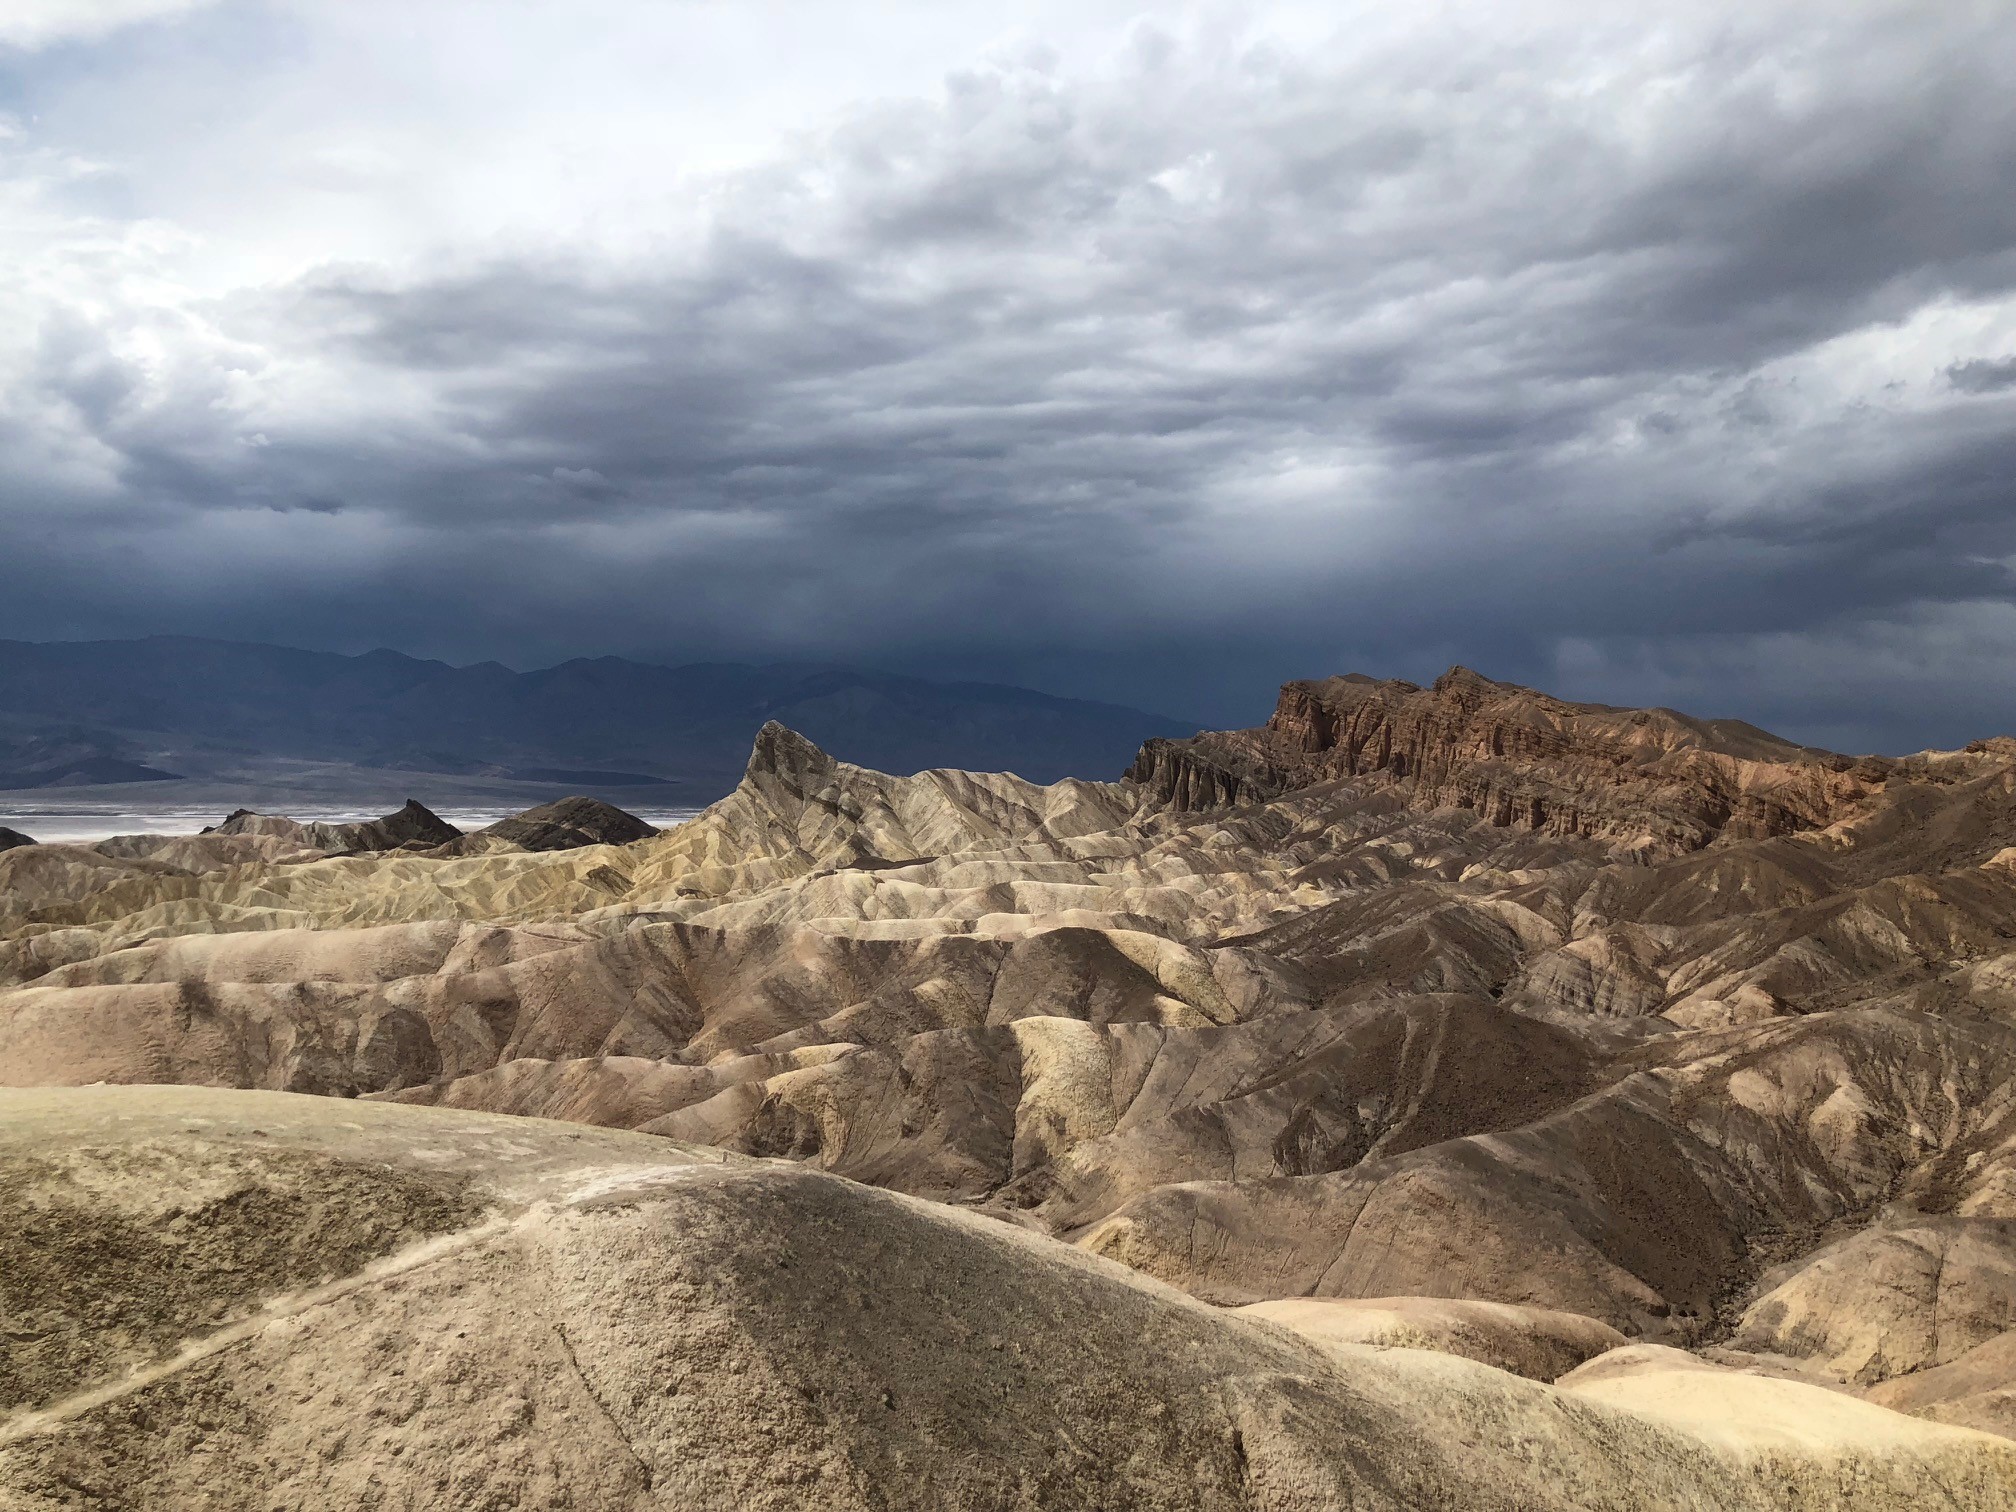 overcast sky above rock outcropping in desert